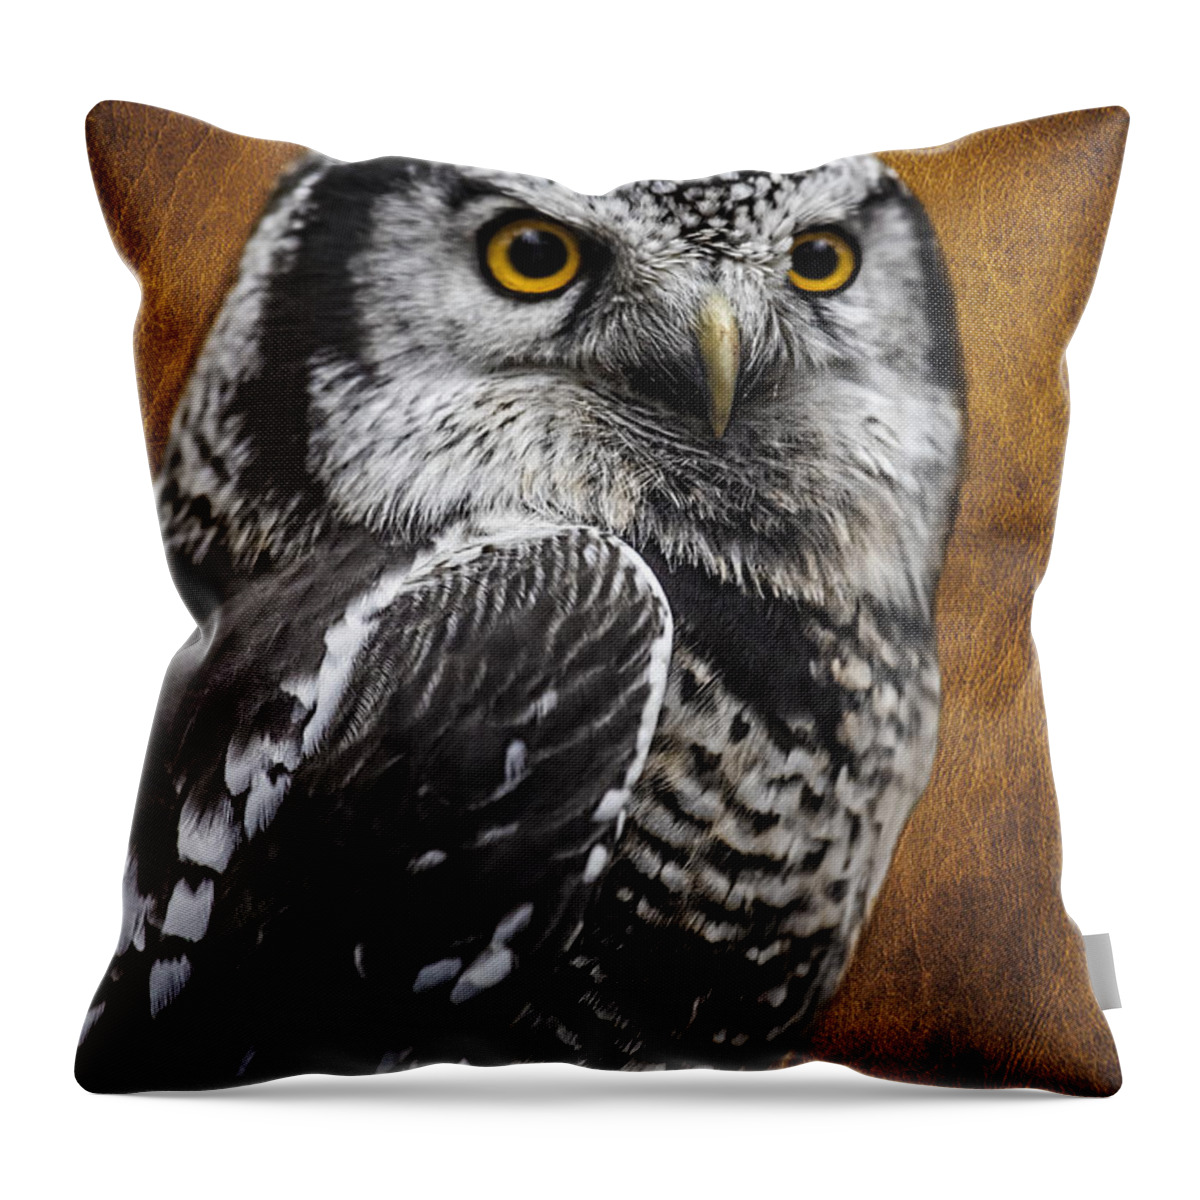 Northern Hawk Owl Throw Pillow featuring the photograph Northern Hawk Owl by Wes and Dotty Weber